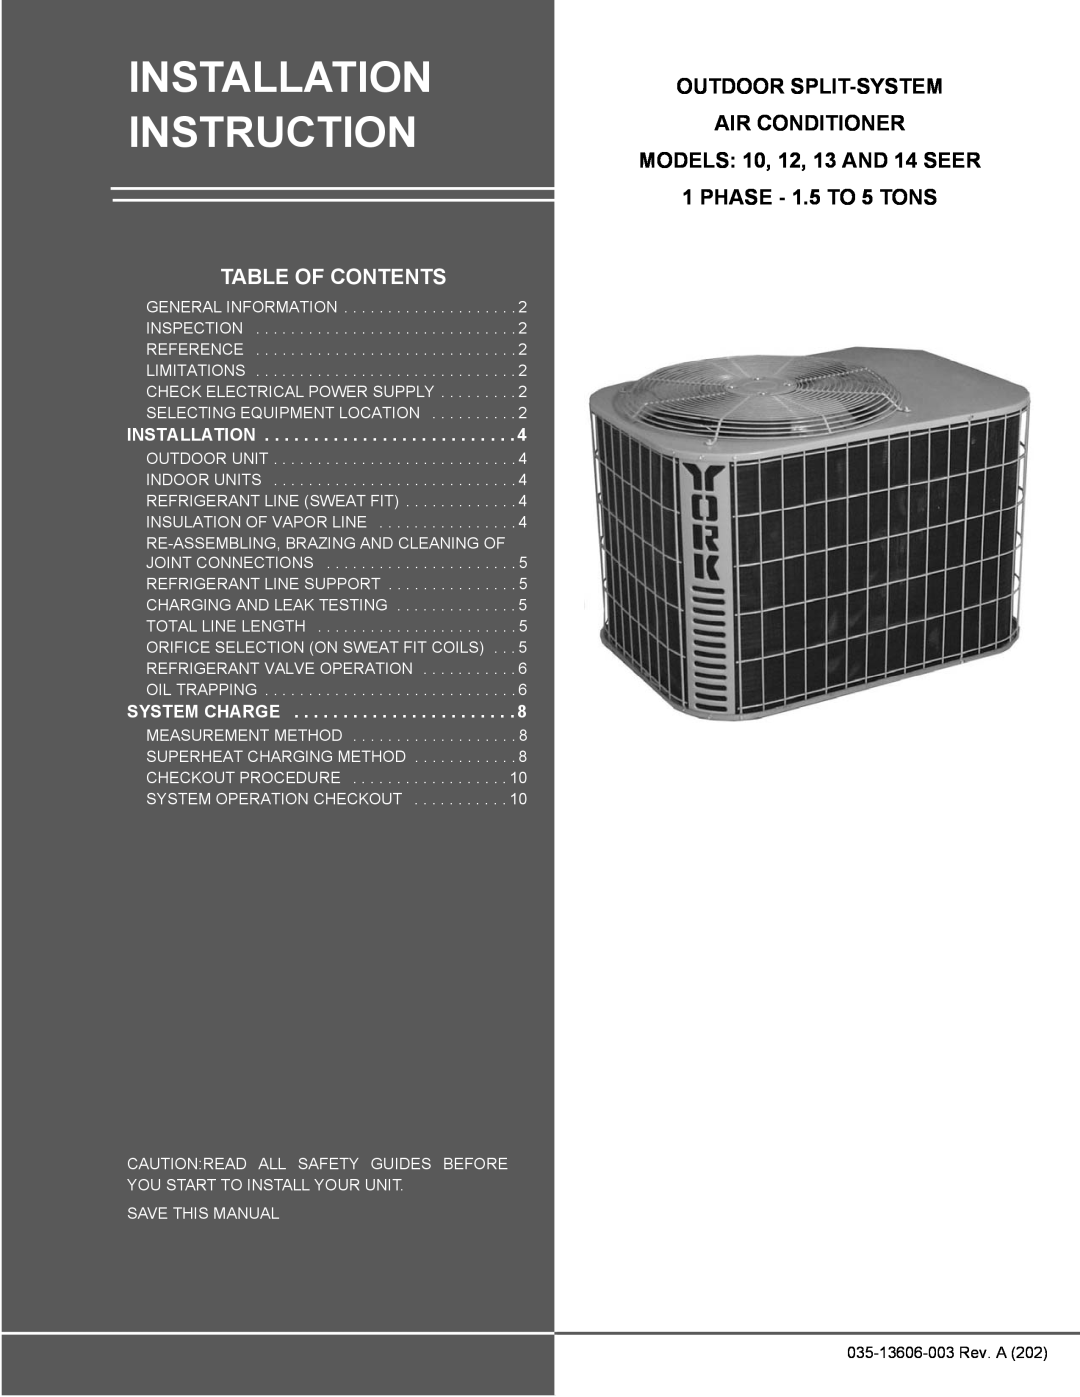 York manual Outdoor Split-System Air Conditioner, MODELS 10, 12, 13 AND 14 SEER, PHASE - 1.5 TO 5 TONS 